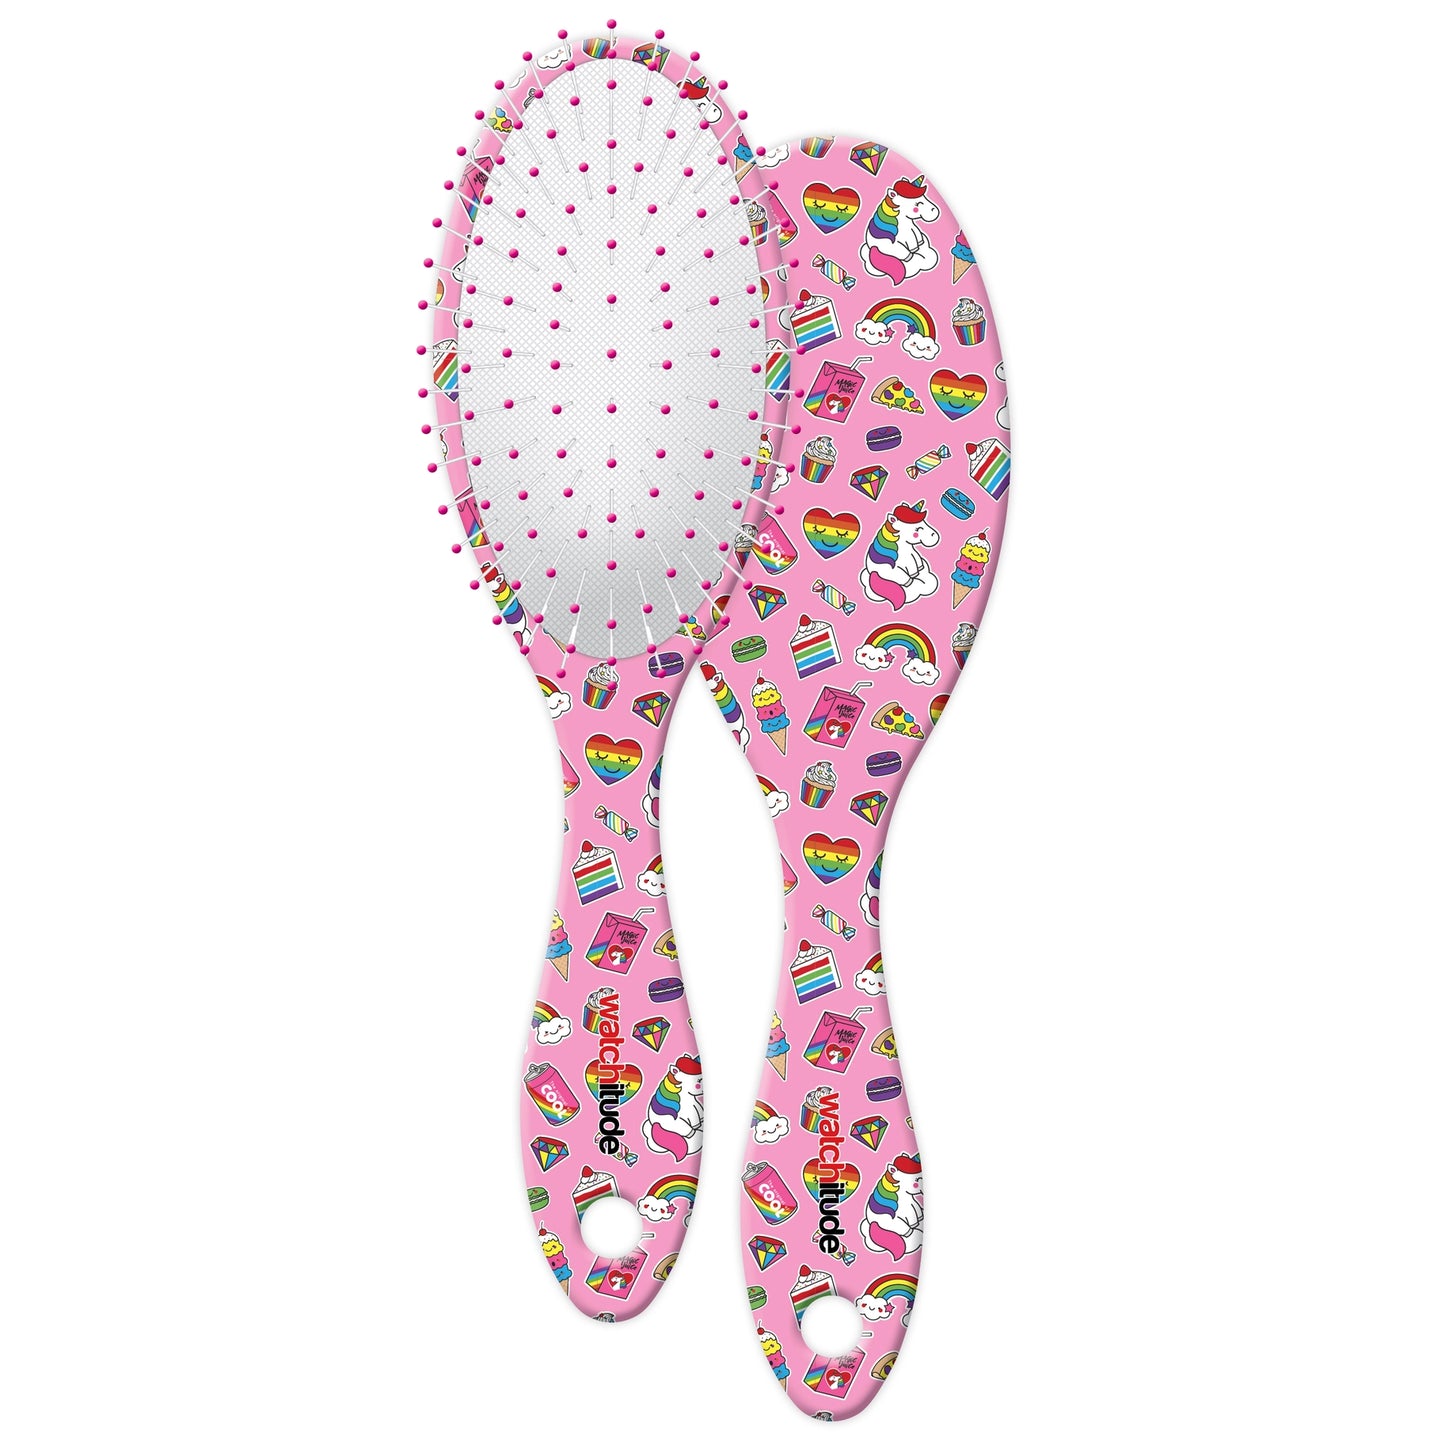 Pink hairbrush with multi-colored prints of unicorns, rainbows, hearts, cakes, juiceboxes, and macaroons, with white bristles with pink tips.